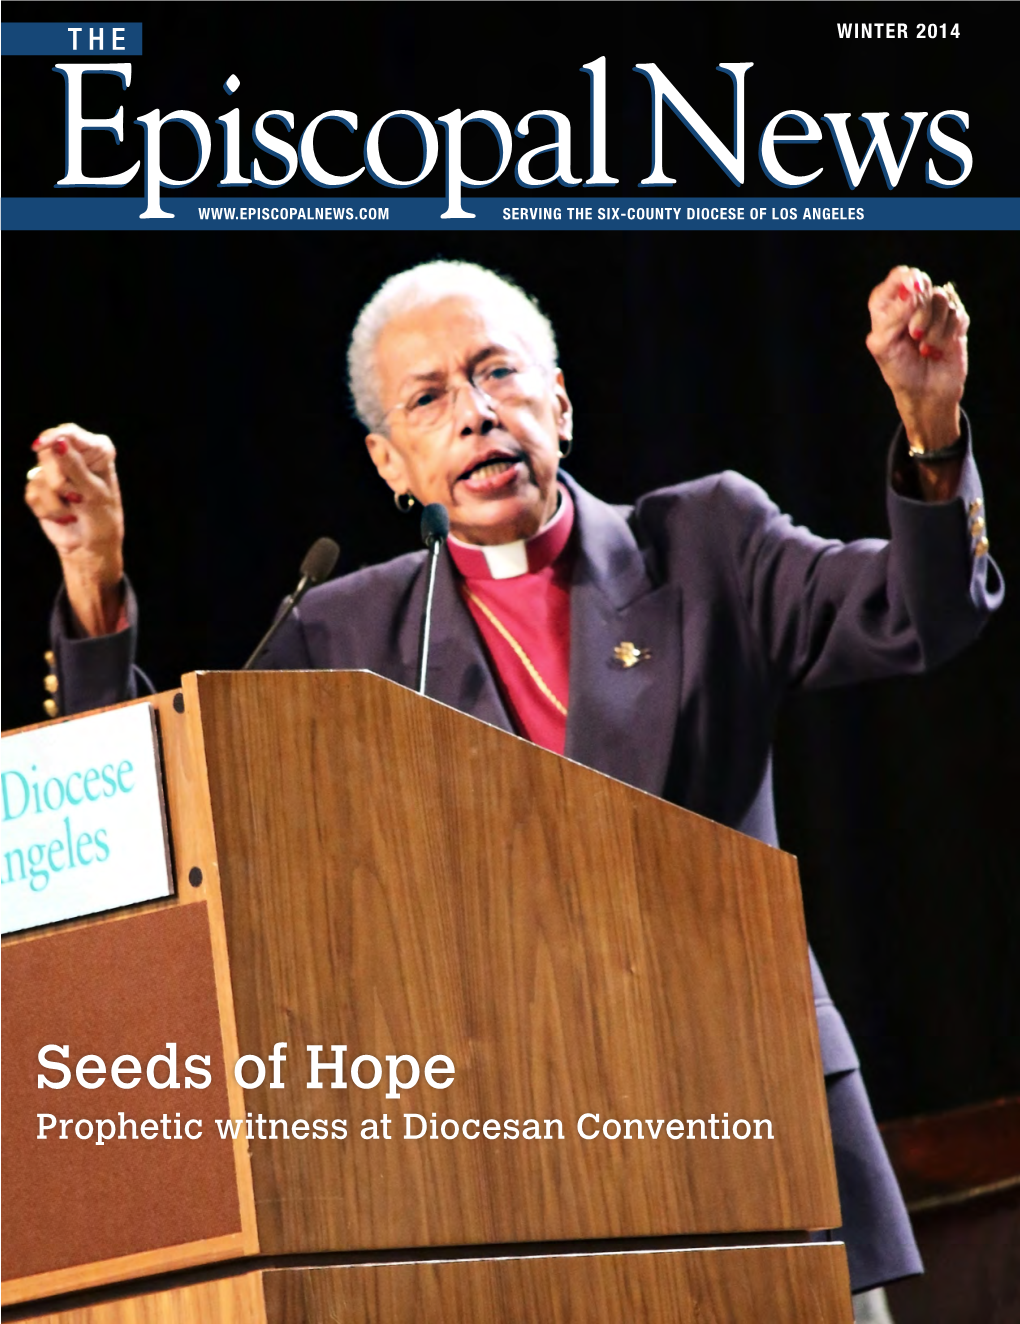 Seeds of Hope Prophetic Witness at Diocesan Convention